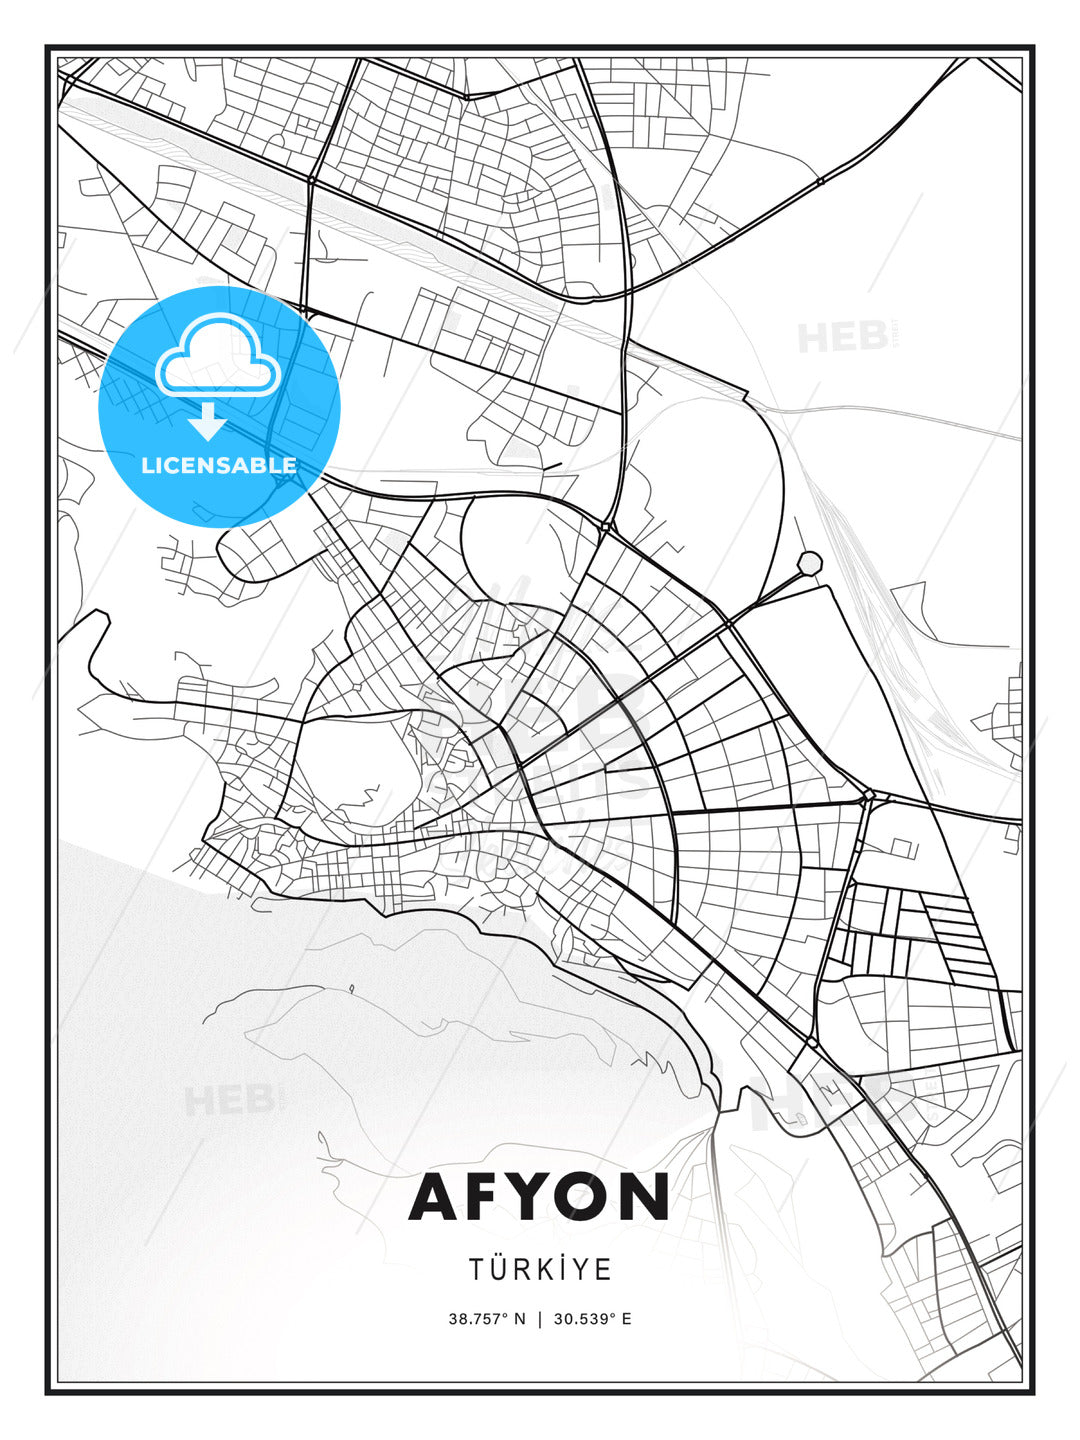 Afyon, Turkey, Modern Print Template in Various Formats - HEBSTREITS Sketches